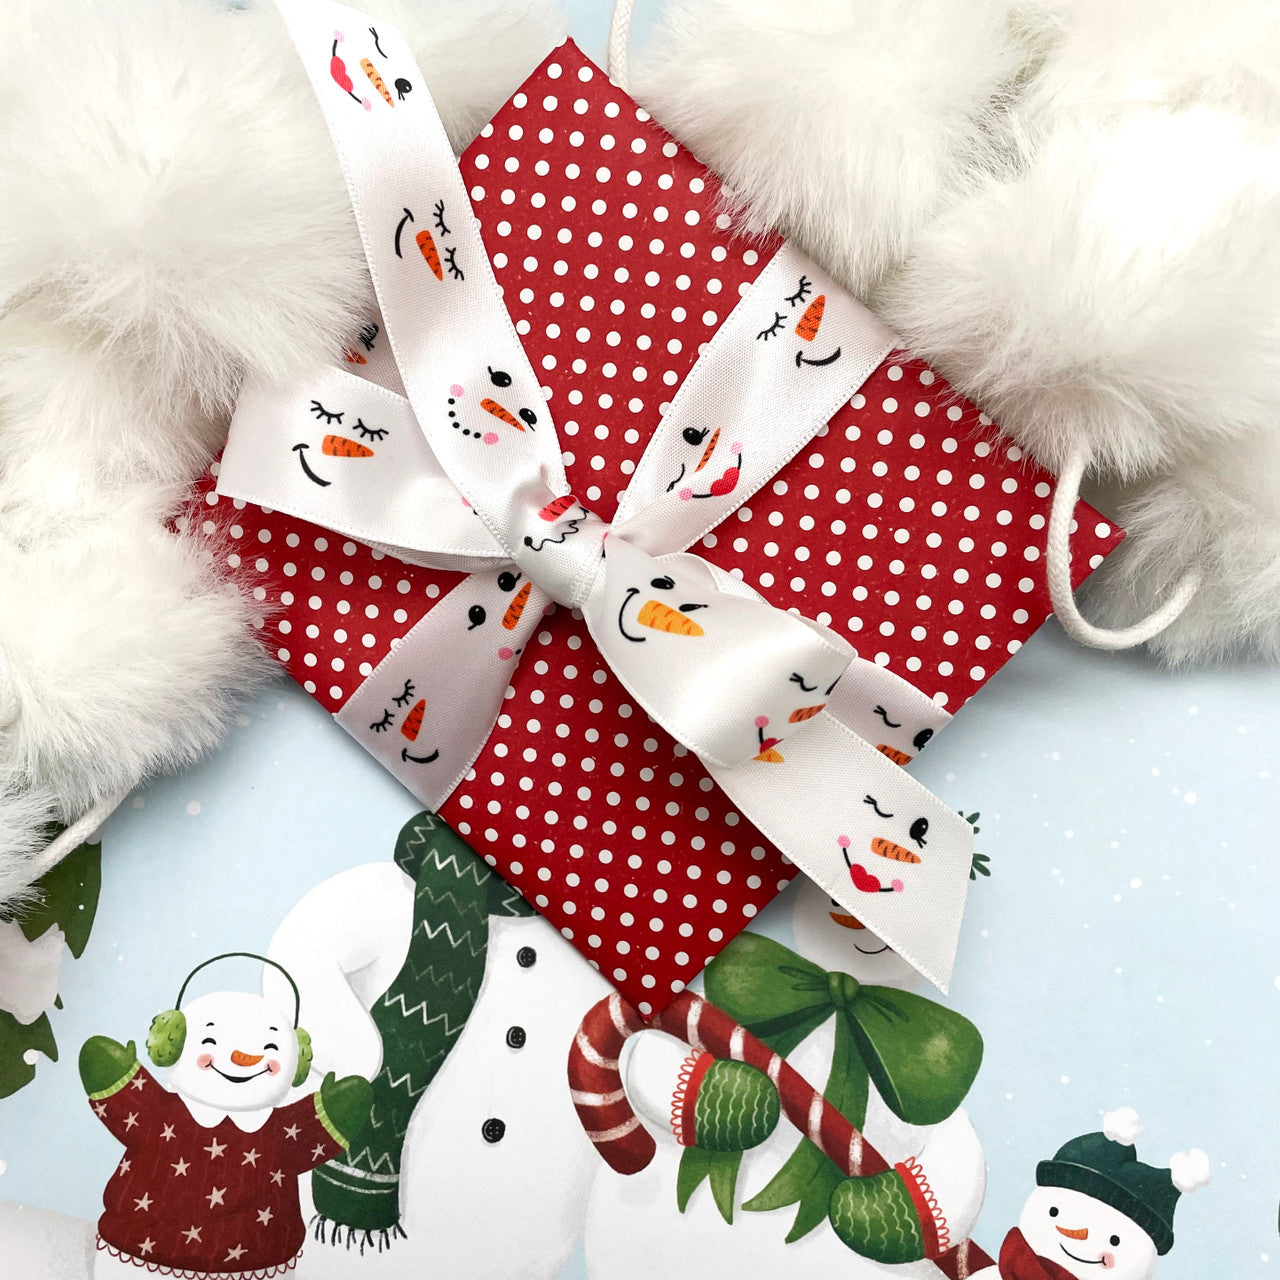 Our sweet snowman faces are adorable tied on a very special Christmas gift!